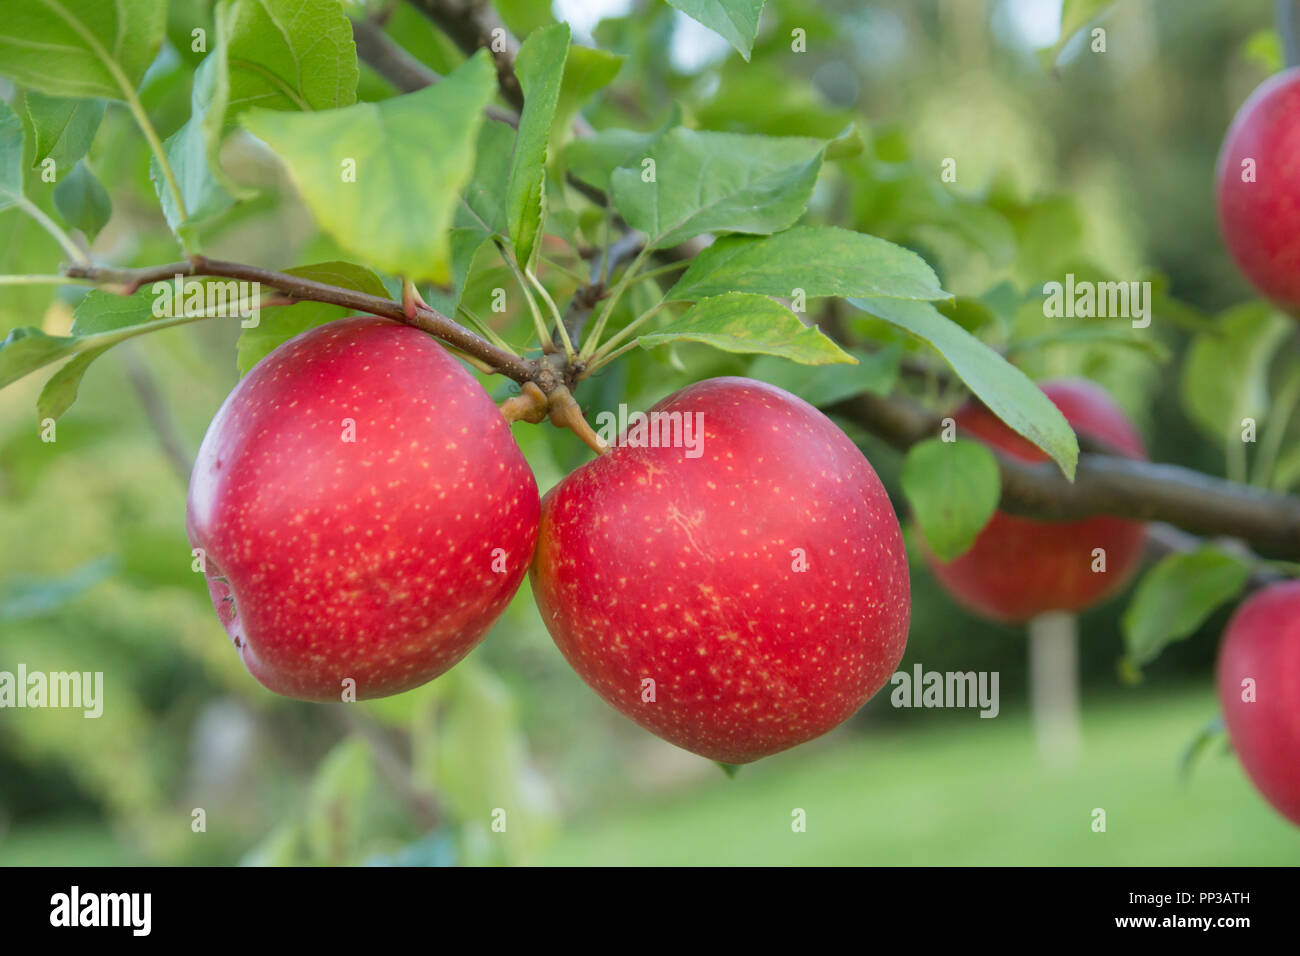 Red apples in orchard Banque D'Images